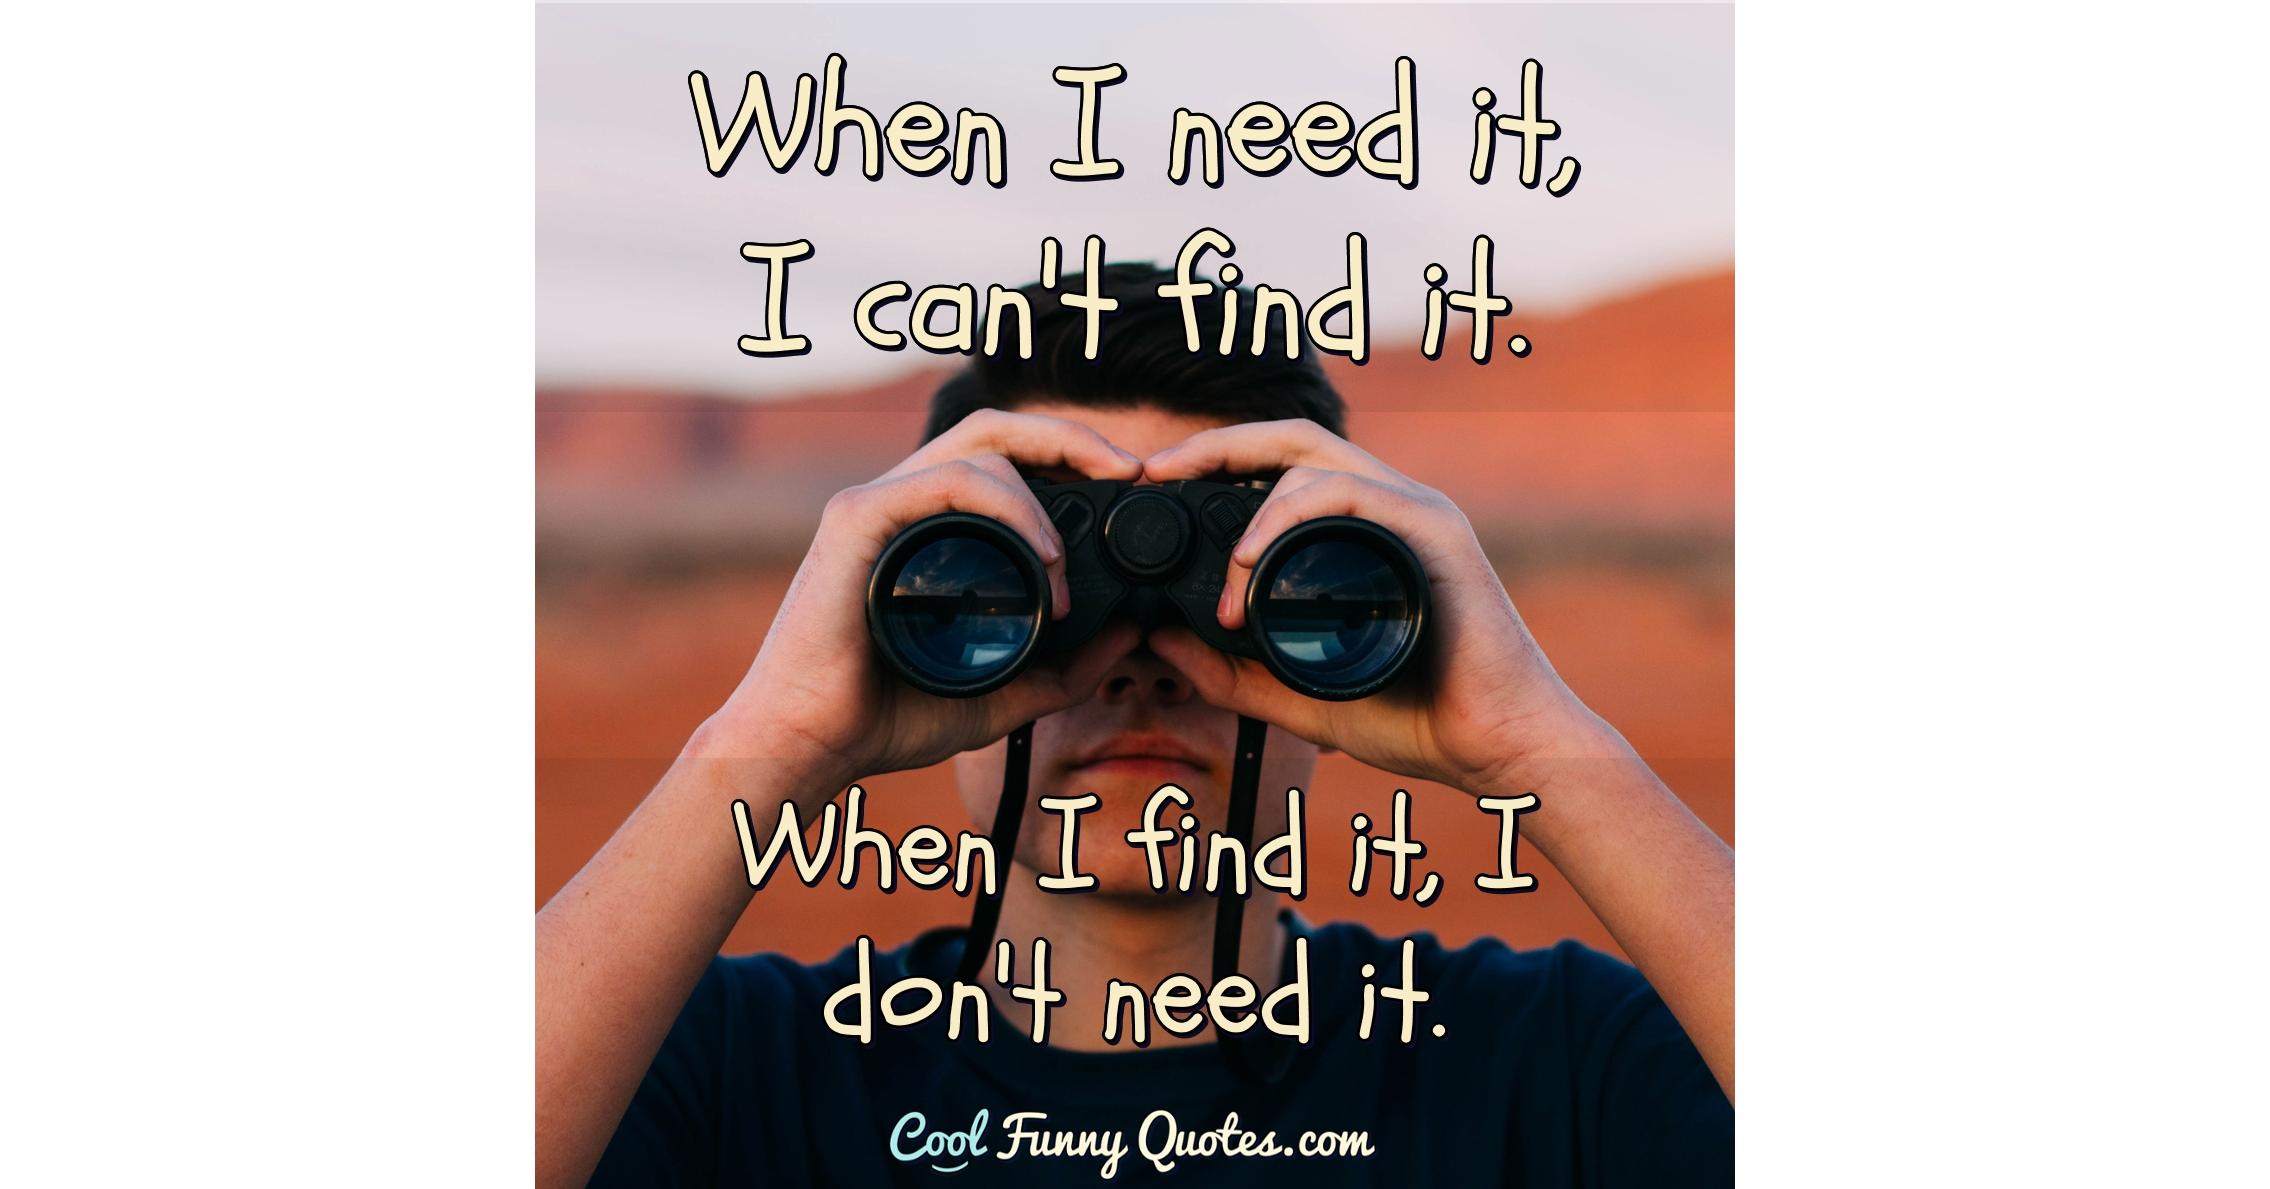 When I find it, I don't need it. When I need it, I can't find it.